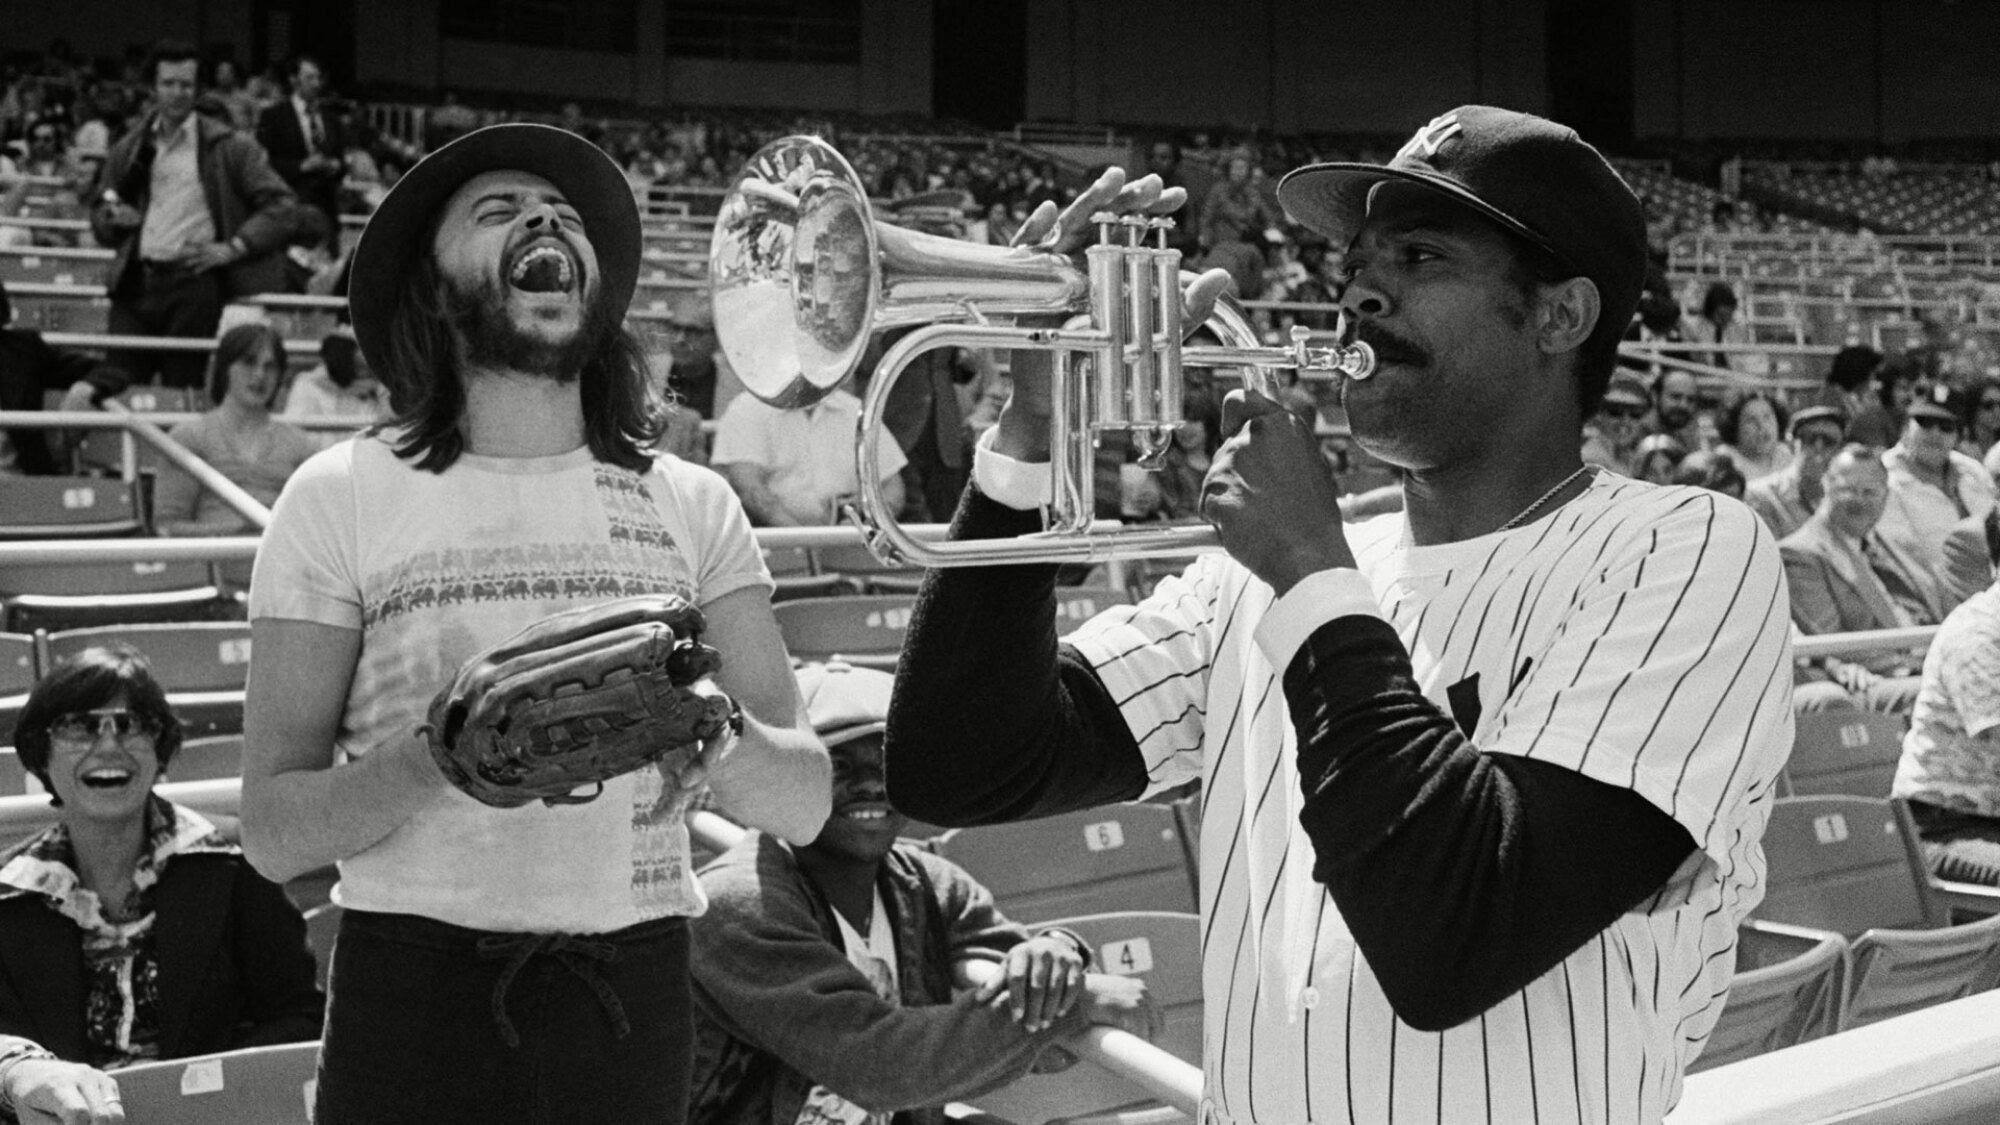 Dock Ellis, wearing a New York Yankees uniform, plays a trumpet while jazz musician Chuck Mangione stands nearby, laughing.